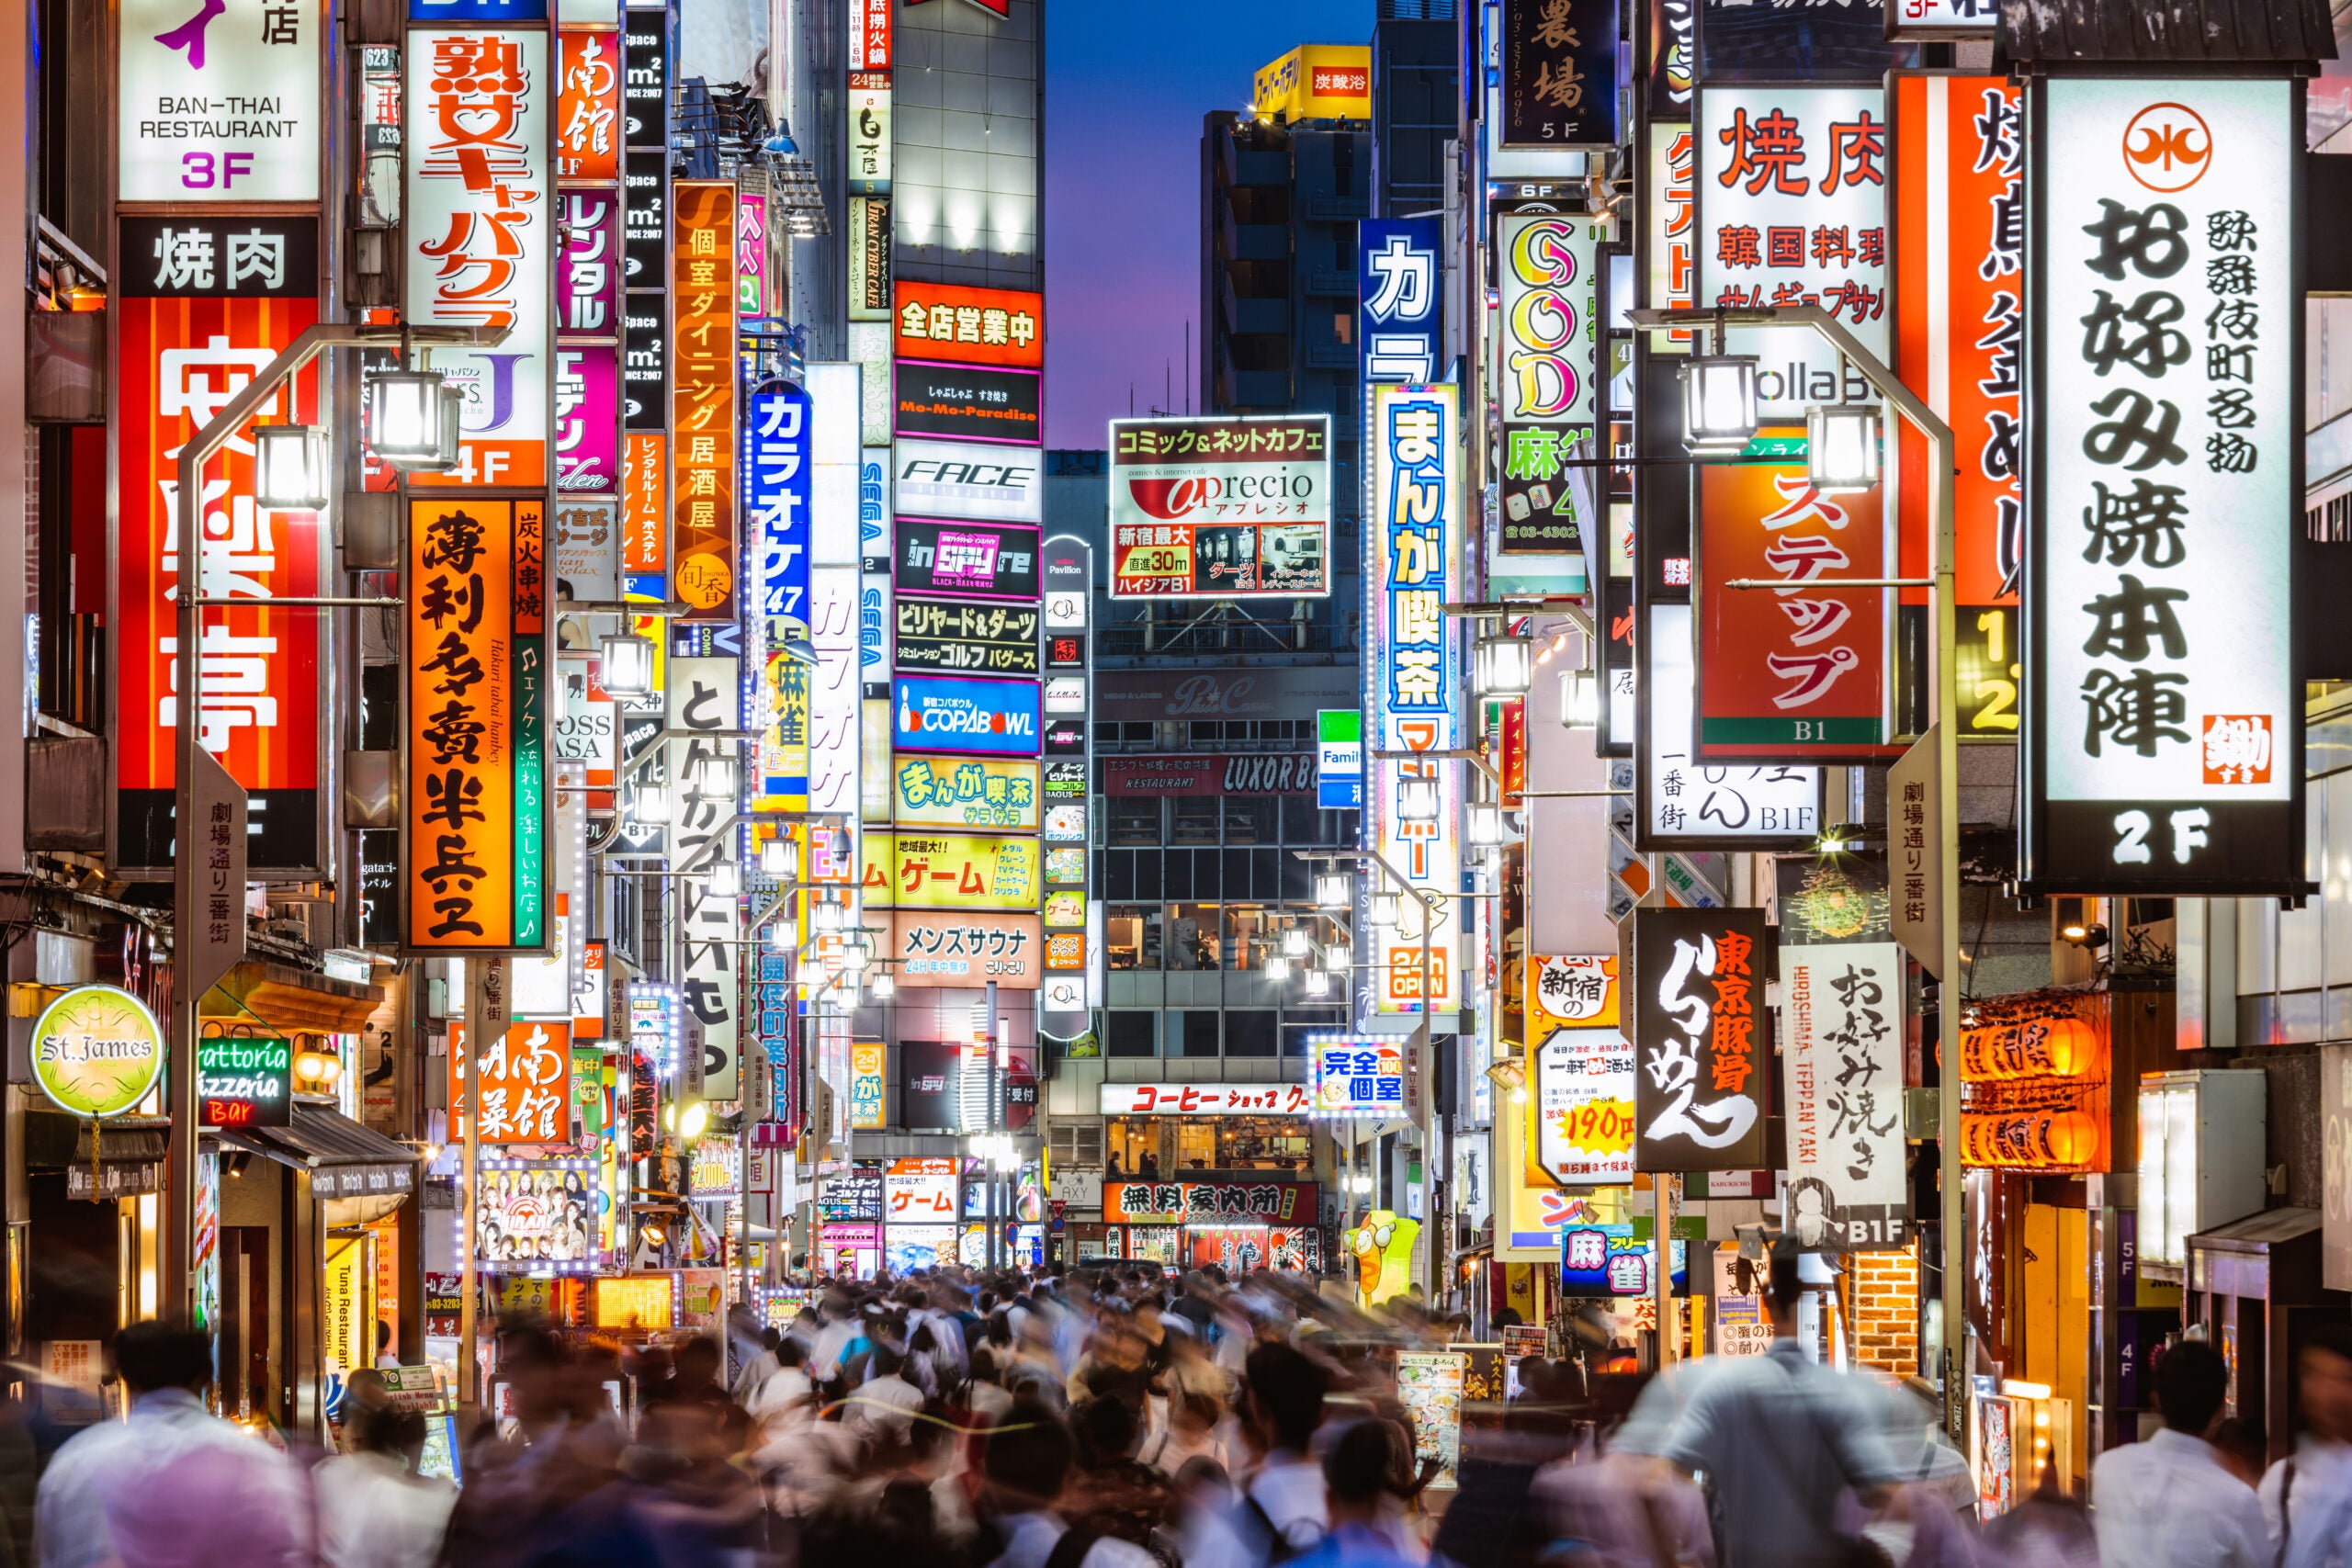 Fares from California and Hawaii to Tokyo for as low as $550 economy and $1,525 ..